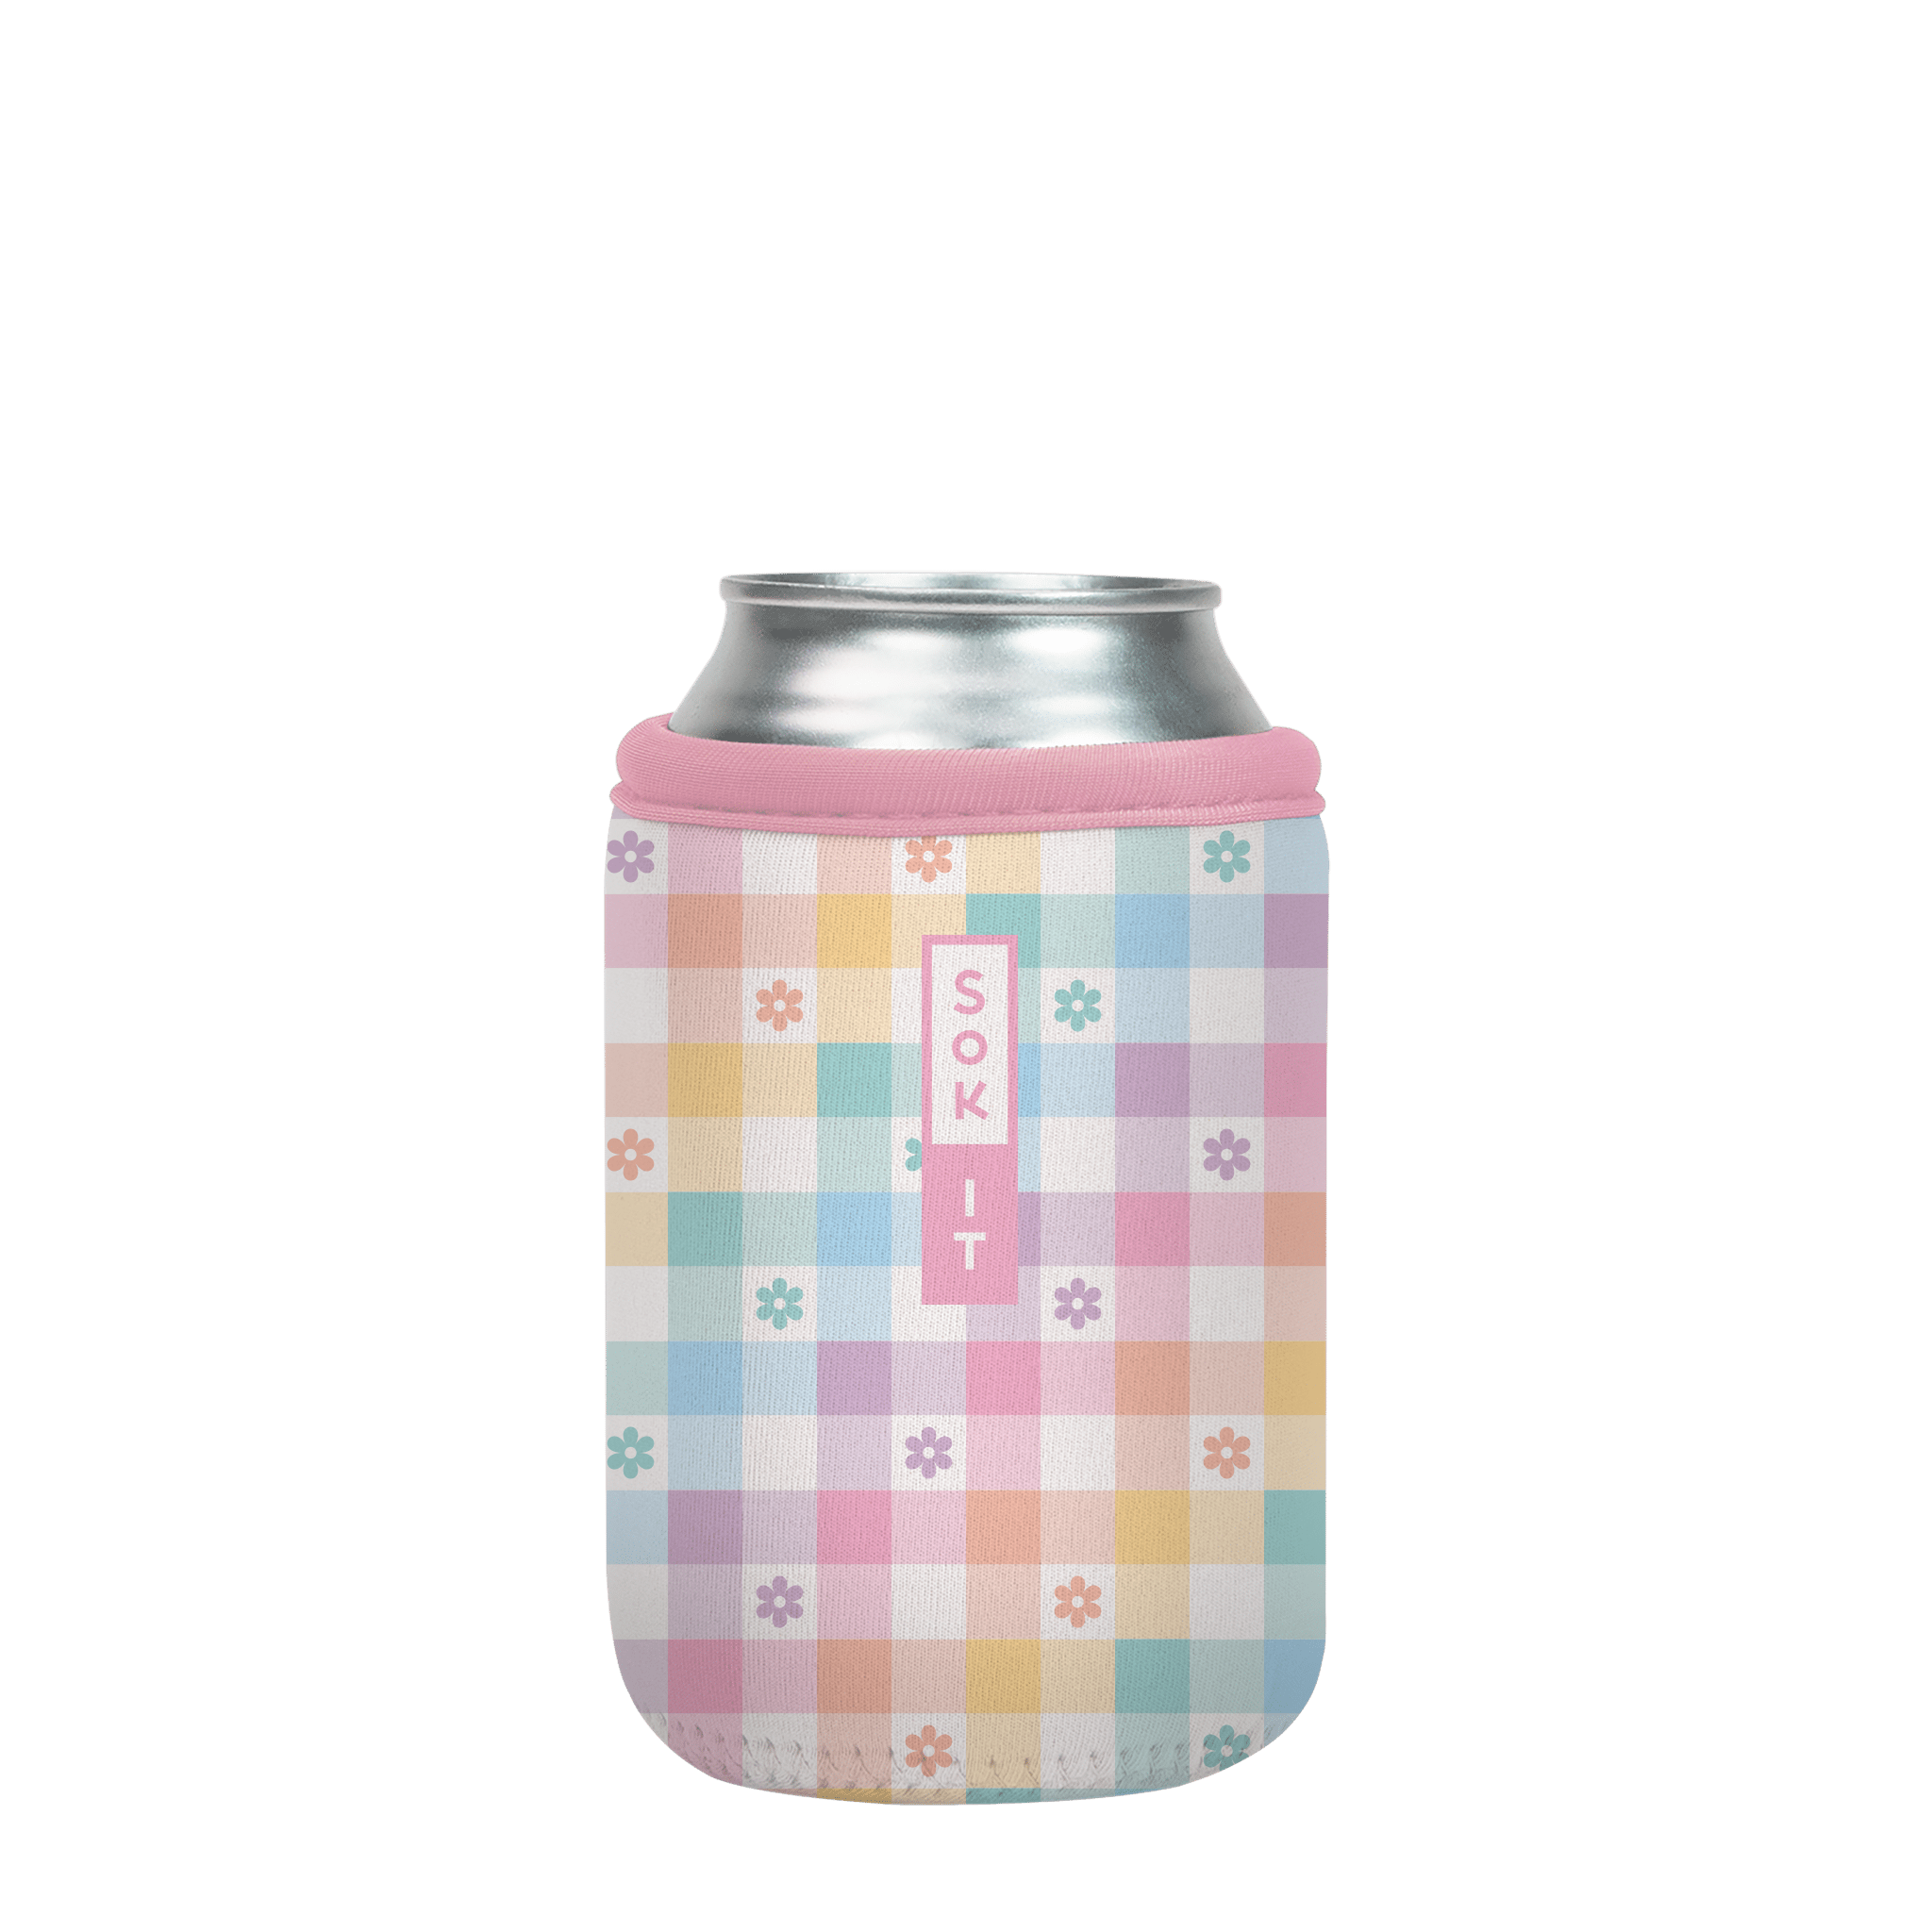 CanSok-Floral Gingham Flowers 12oz Can